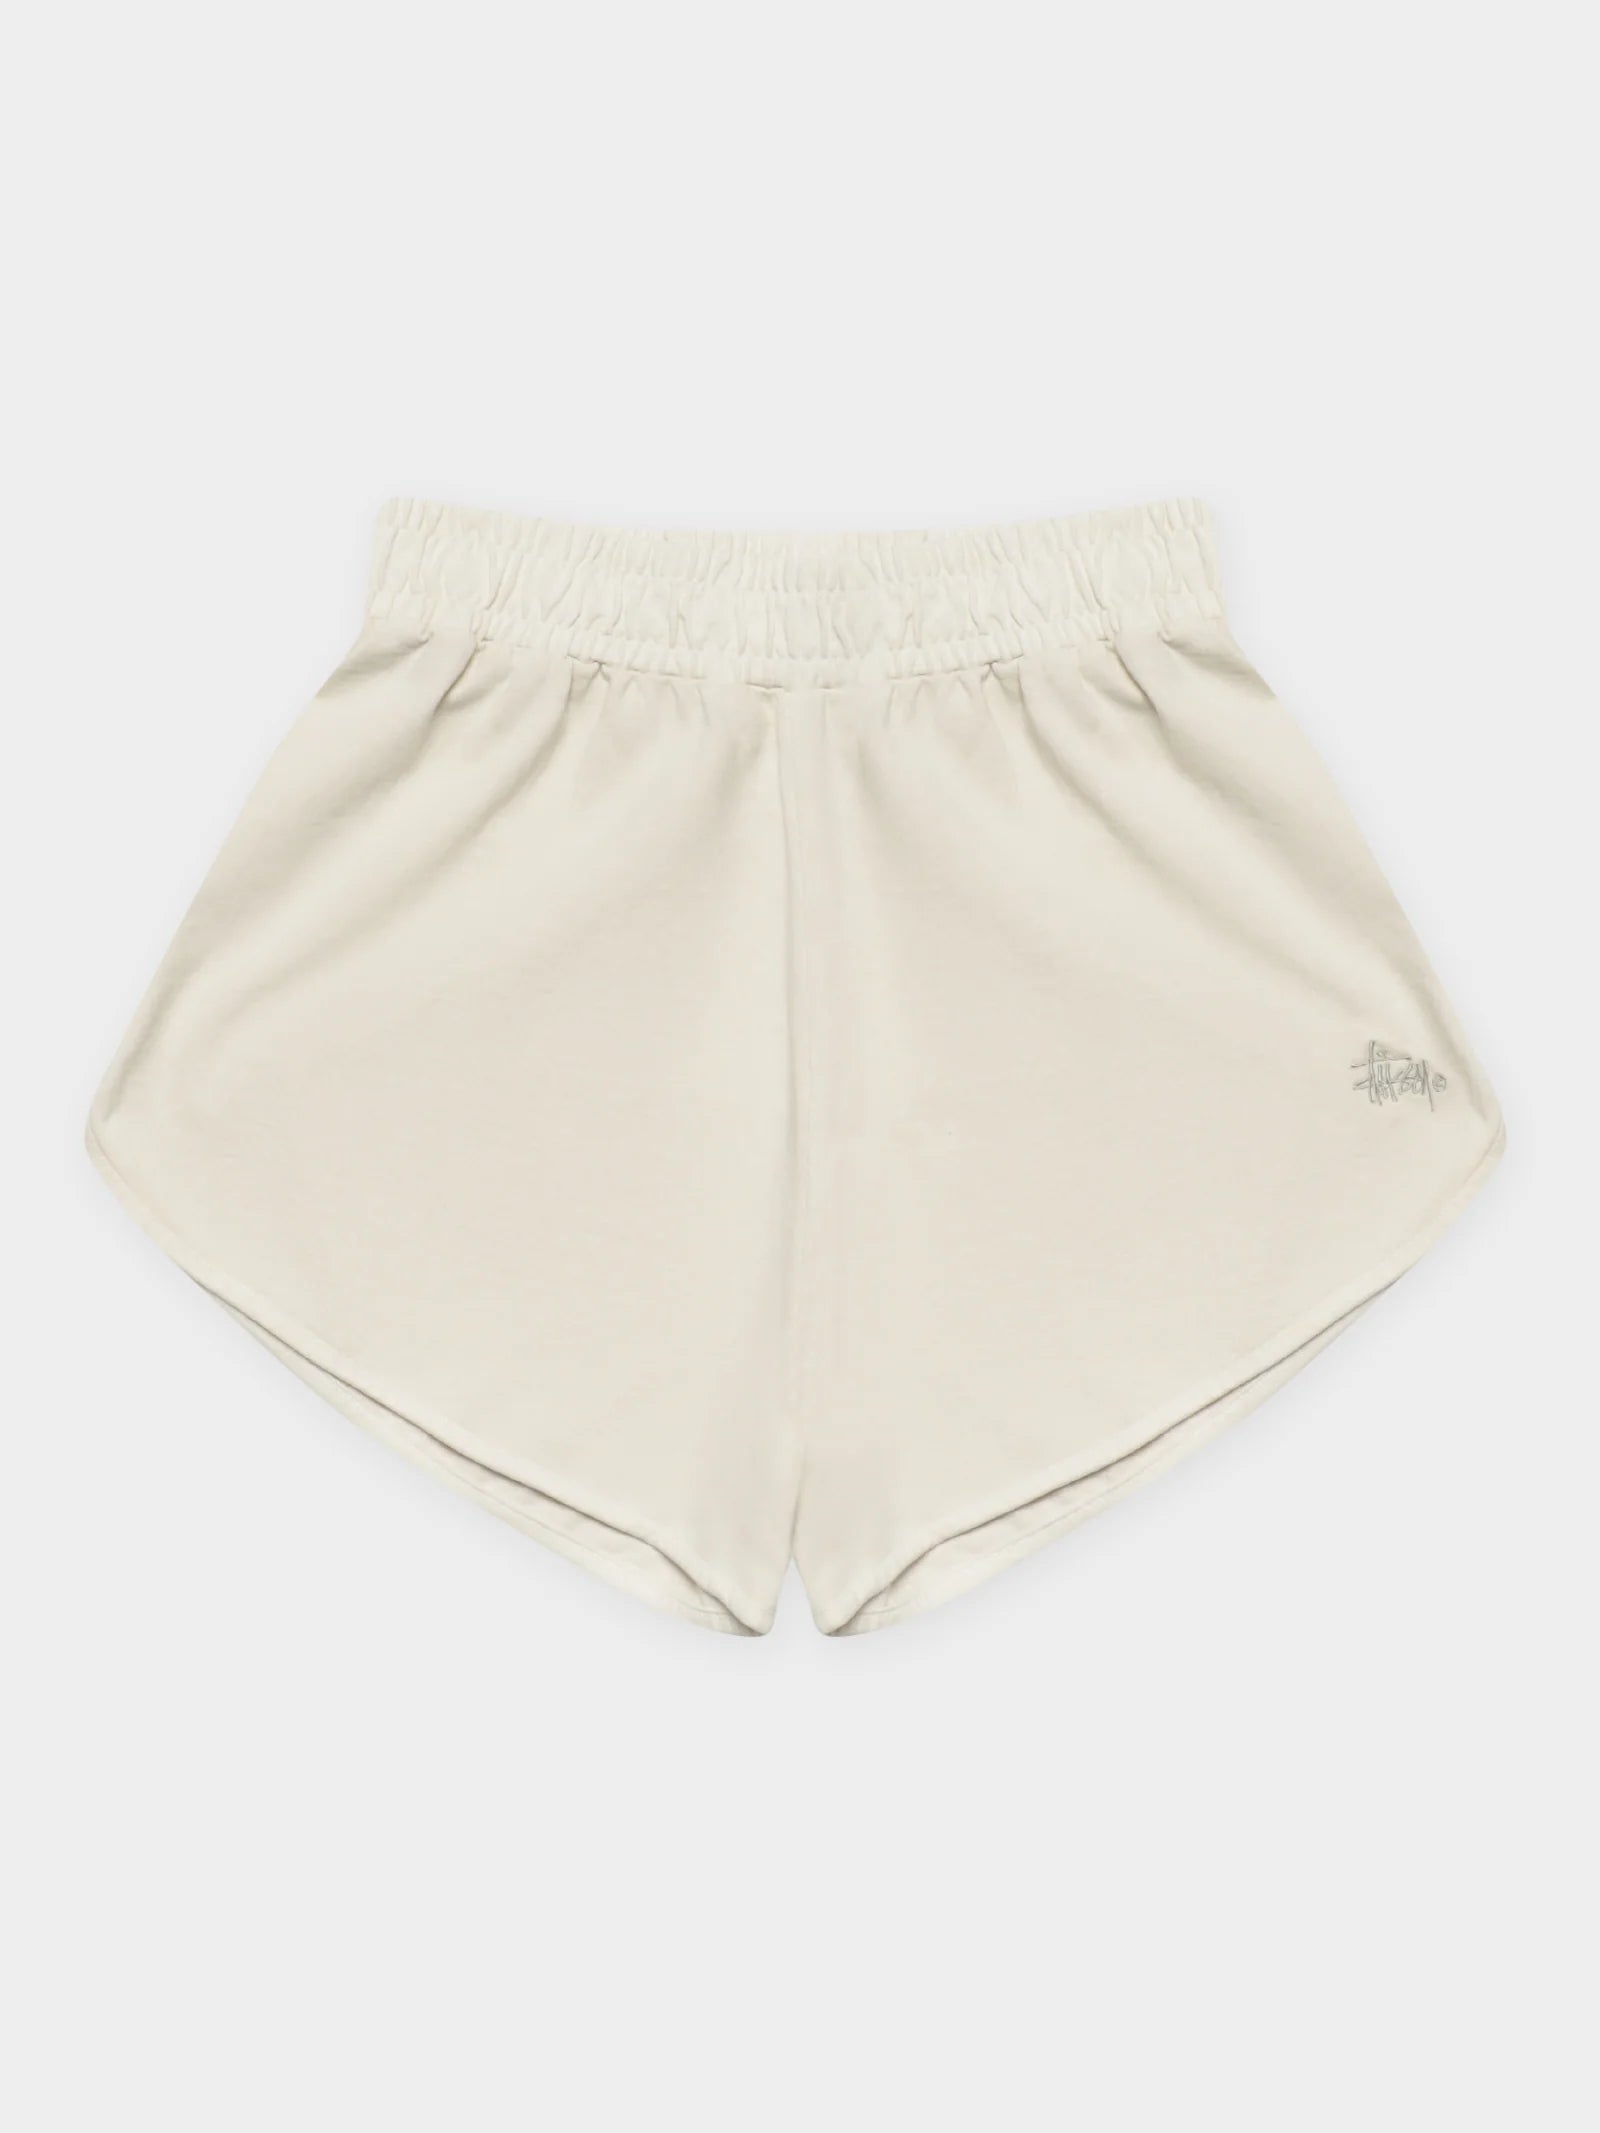 Stussy rockford rugby shorts - white sand